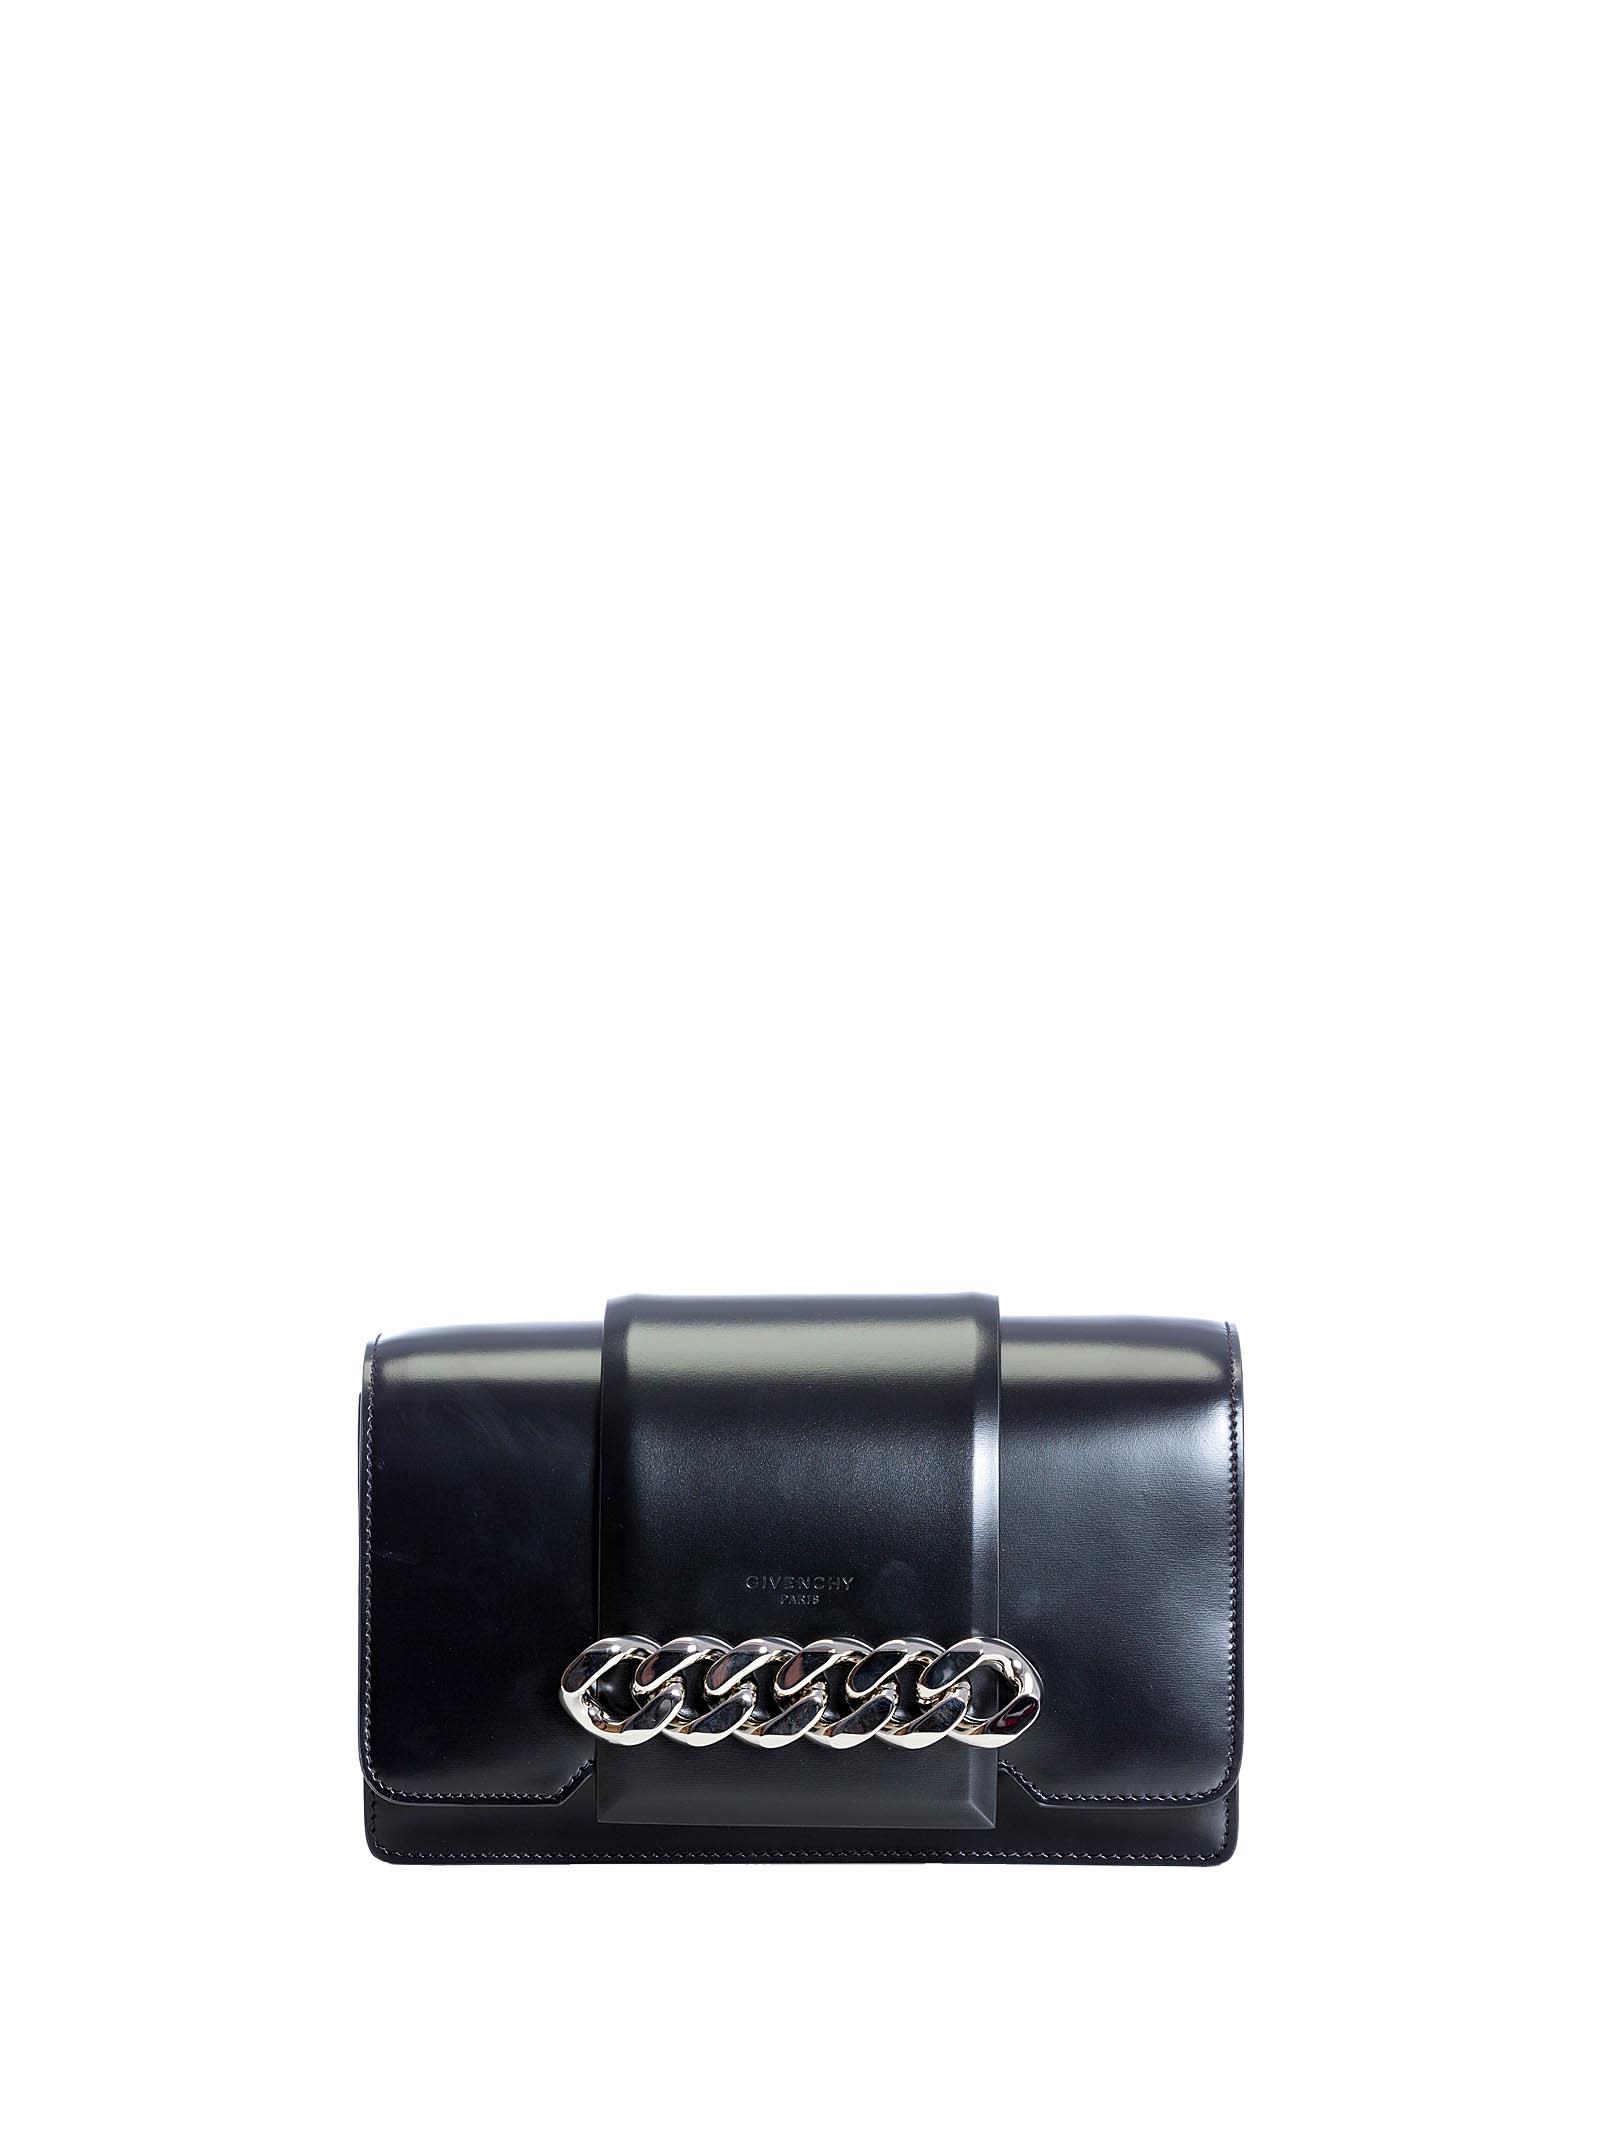 Givenchy Small Infinity Calfskin Leather Shoulder Bag - Black | ModeSens